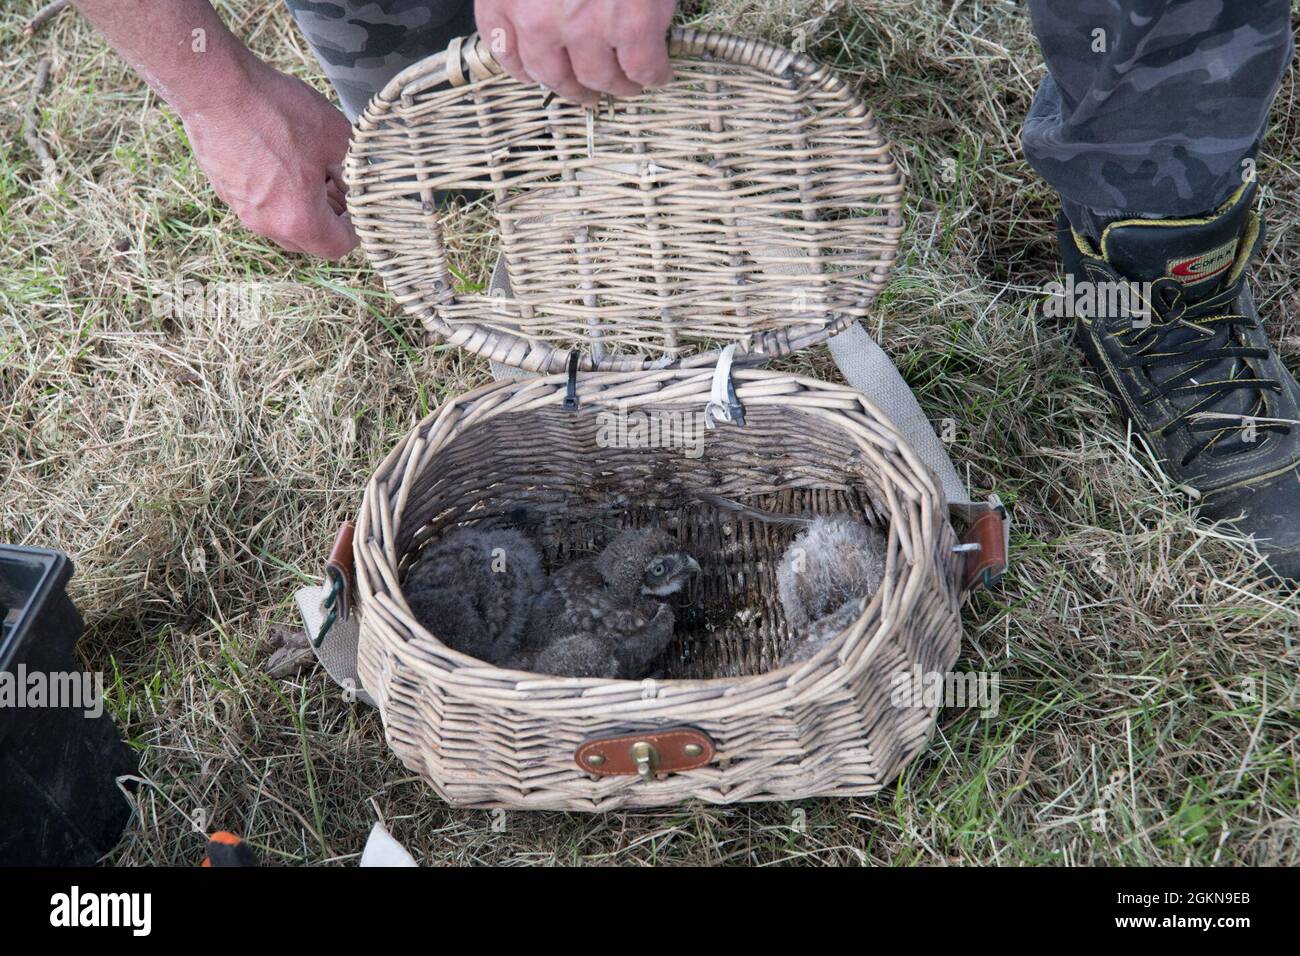 A volunteer for the Belgian non-profit Noctua.org, closes a woven basket, where he safely places protected birds in order to band them, on Chièvres Air Base, Belgium, June 03, 2021. Banding is a universal and indispensable technique for studying the movement, survival and behavior of birds. Stock Photo